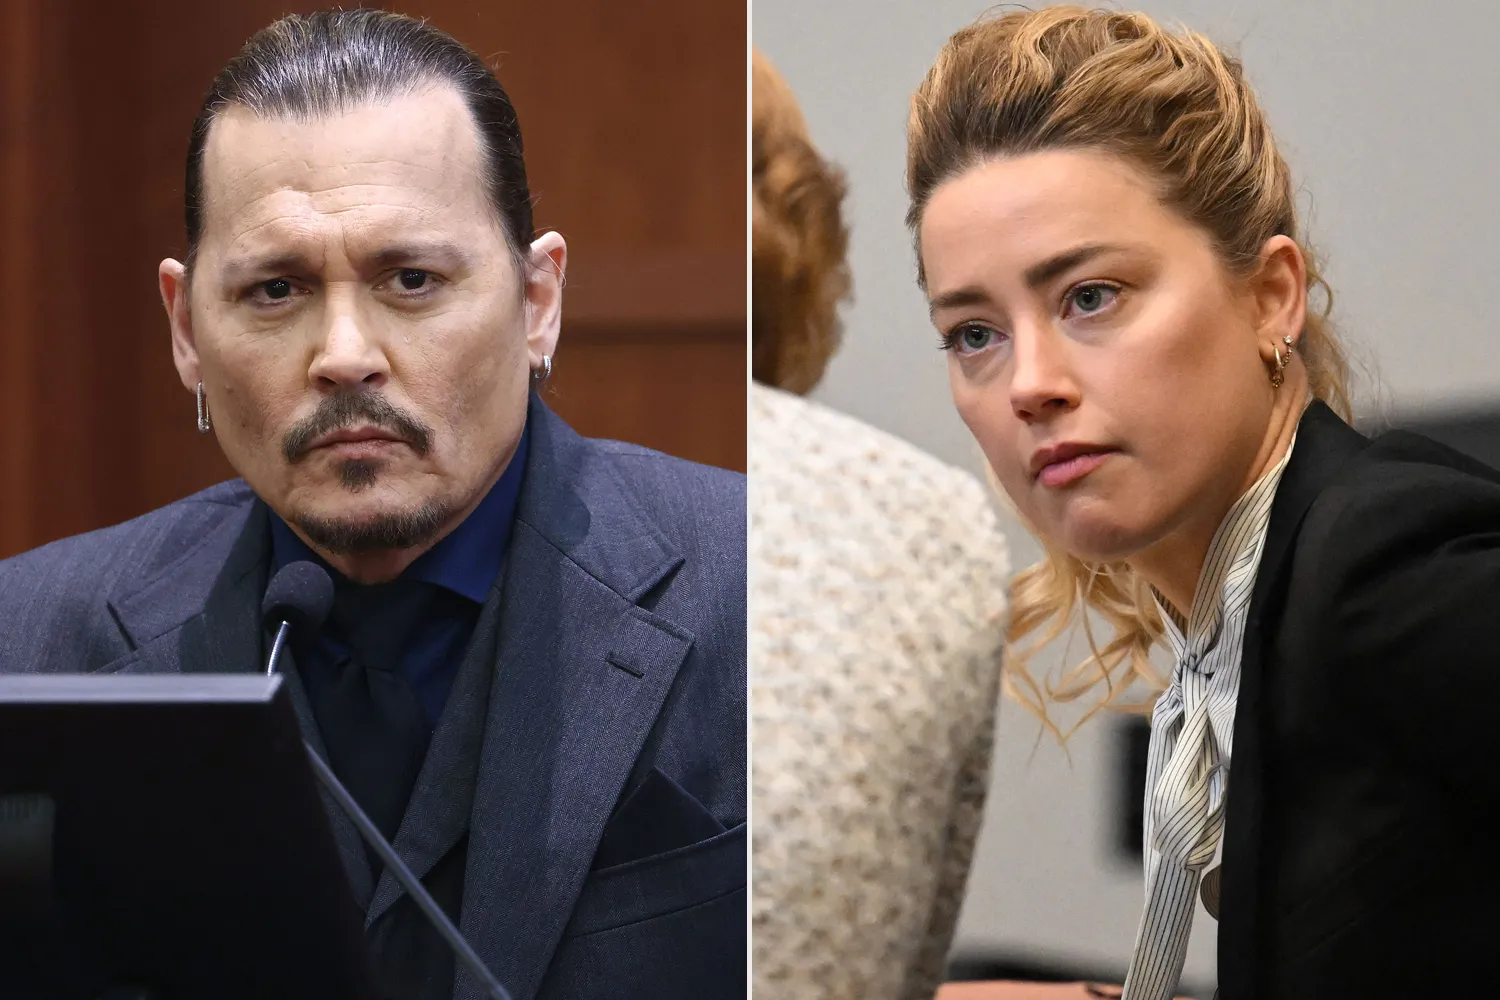 Amber Heard and Johnny Depp during the trial - Fans Now Trolling Amber Heard With #MePoo Fan Campaign